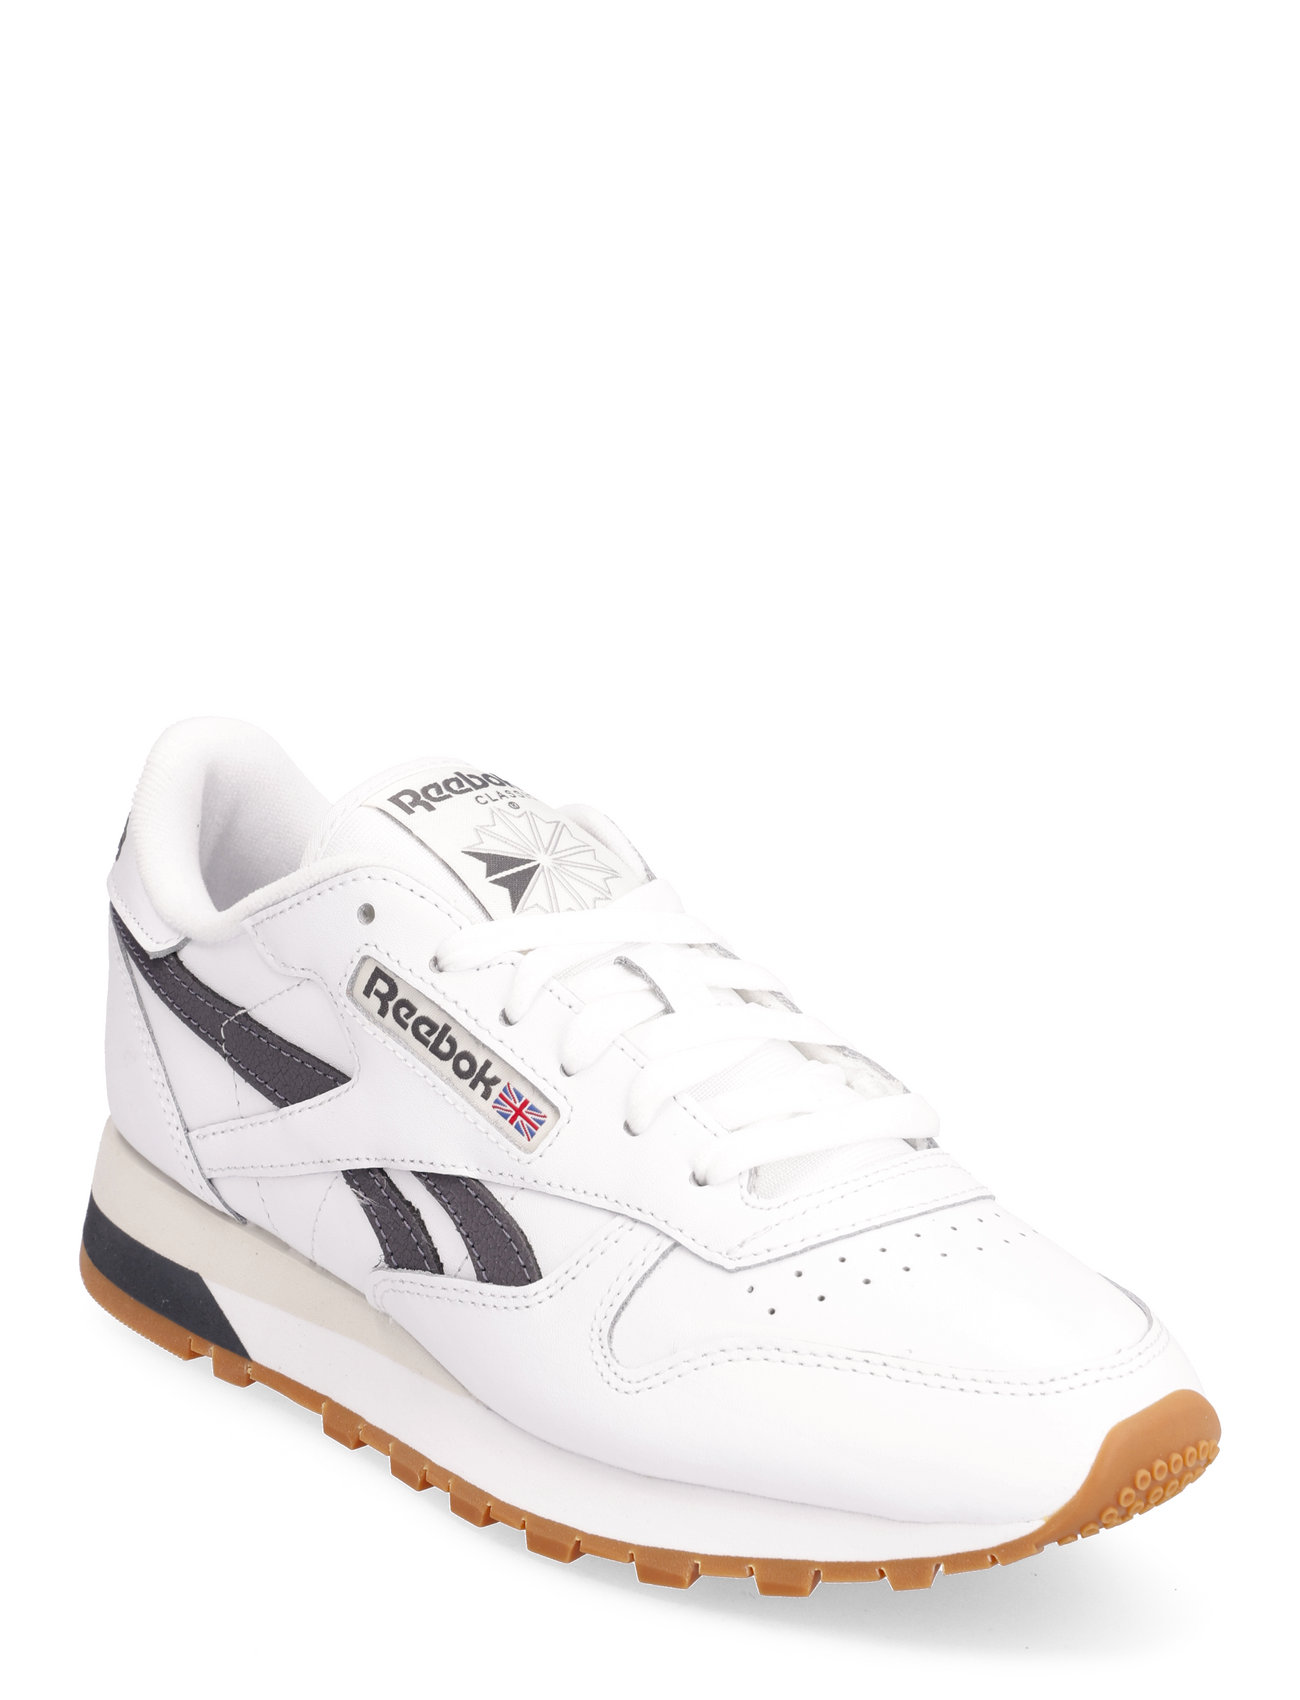 opgroeien dier Afstoting Reebok Classics Classic Leather - Lage sneakers | Boozt.com